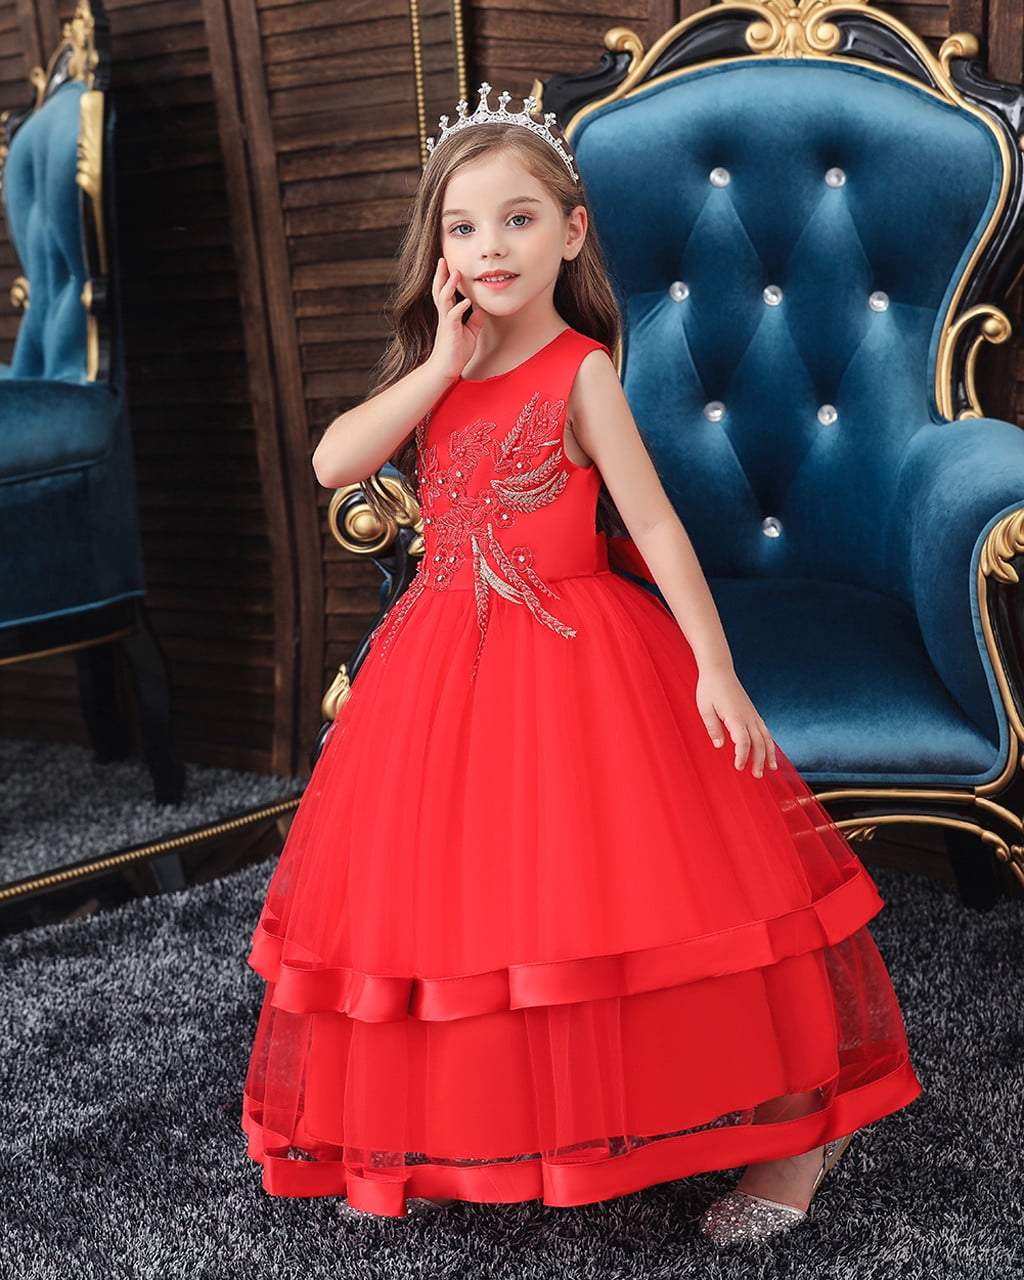 Floral Lace Ruffle Mesh Princess Dress in Red For Kids - Retro, Indie and  Unique Fashion